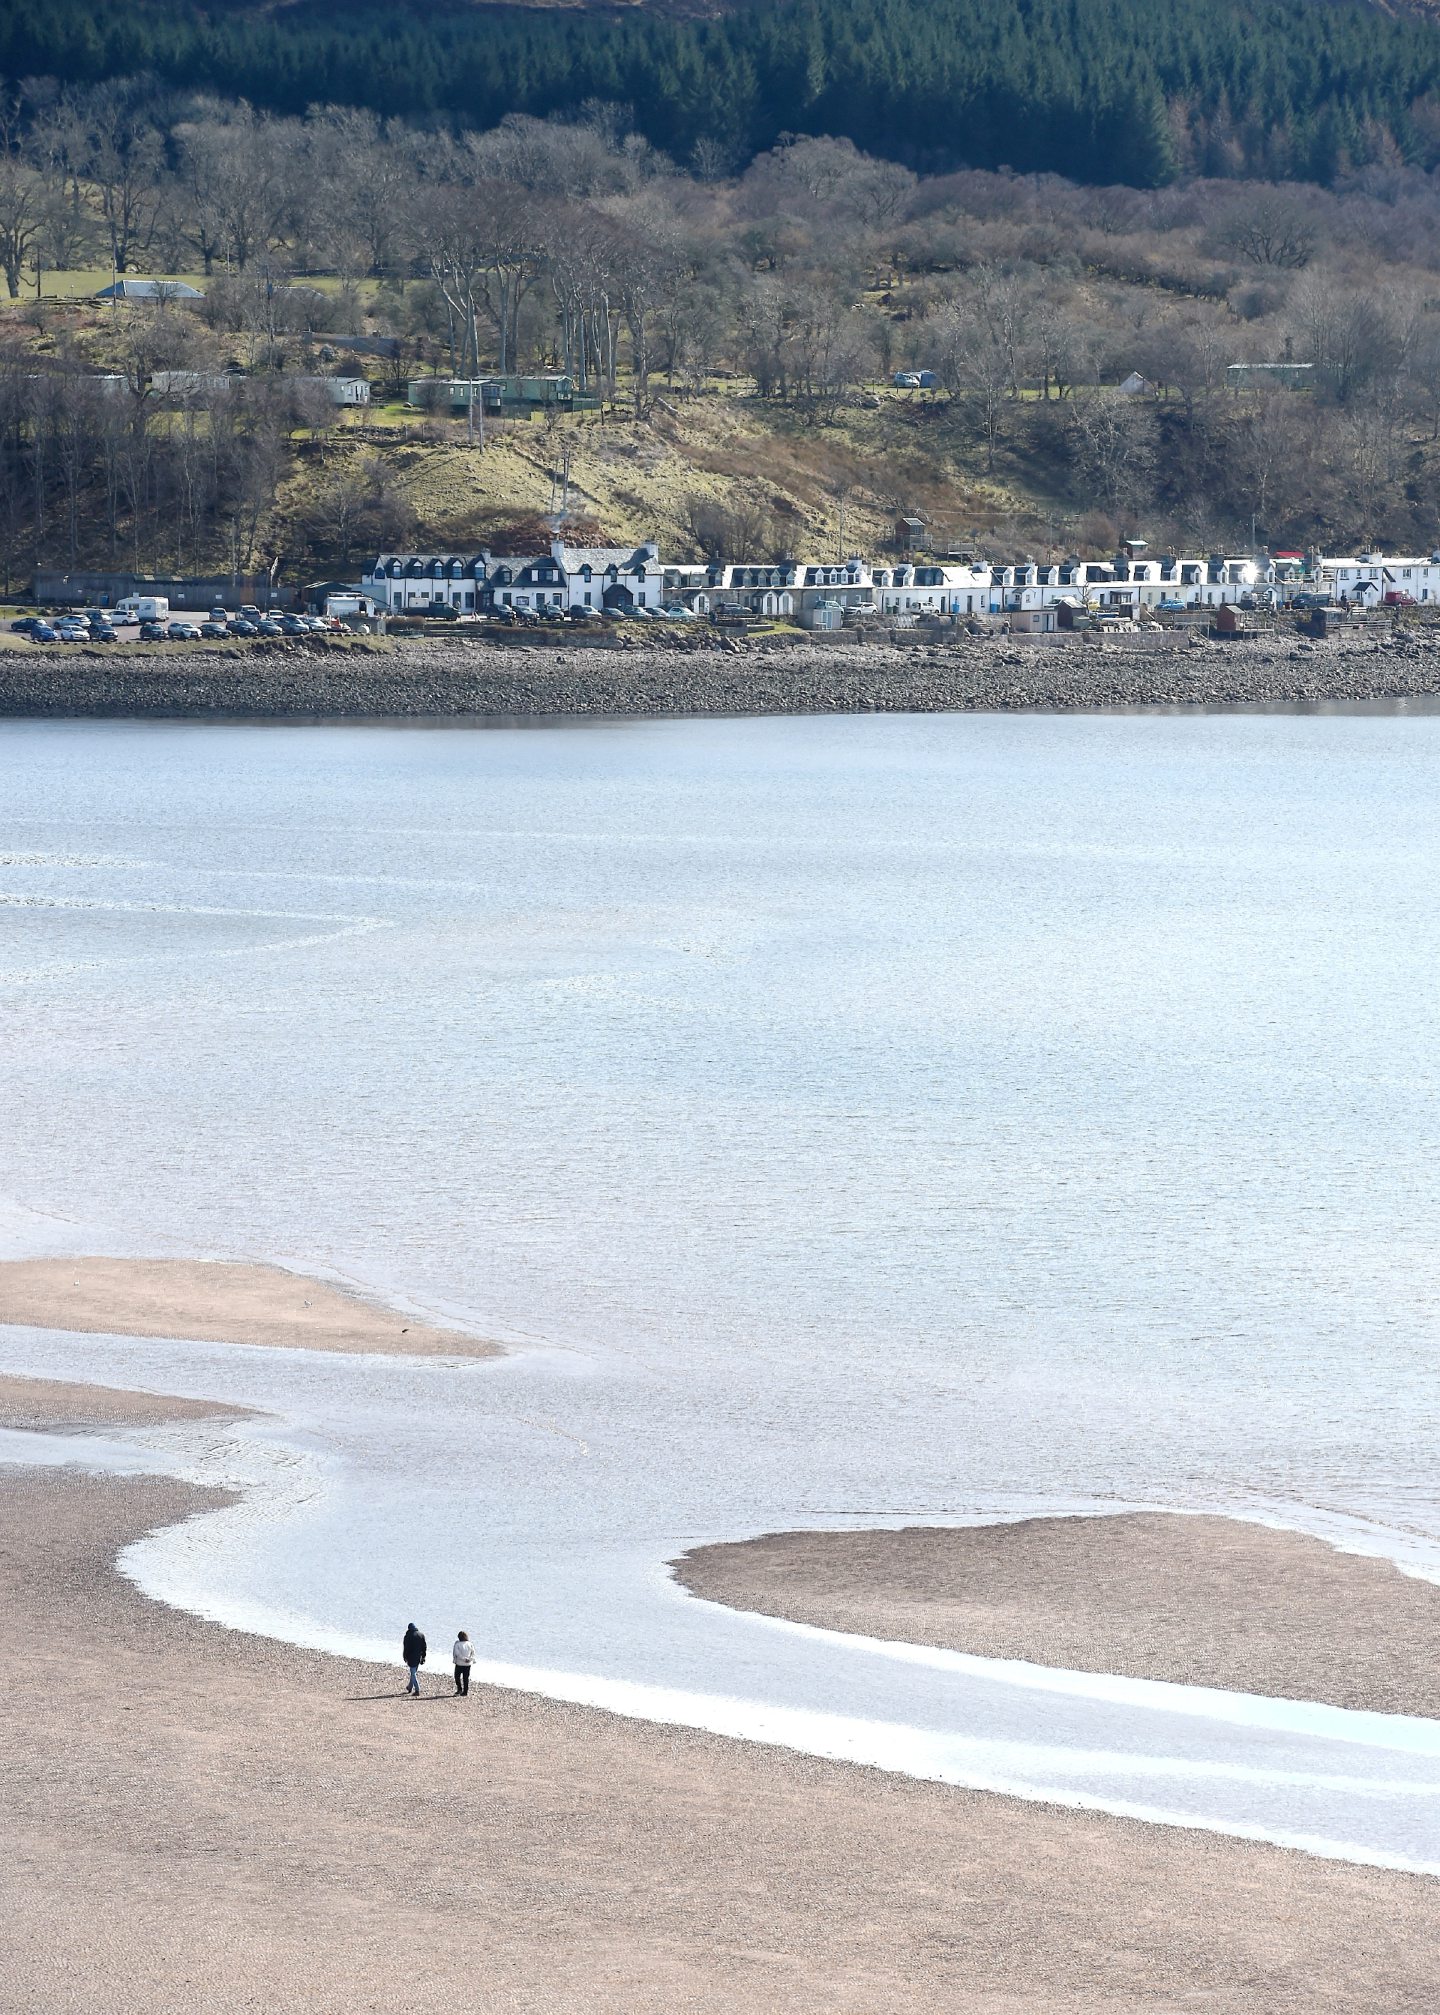 Walkers on the sand of Applecross Bay with the village beyond.